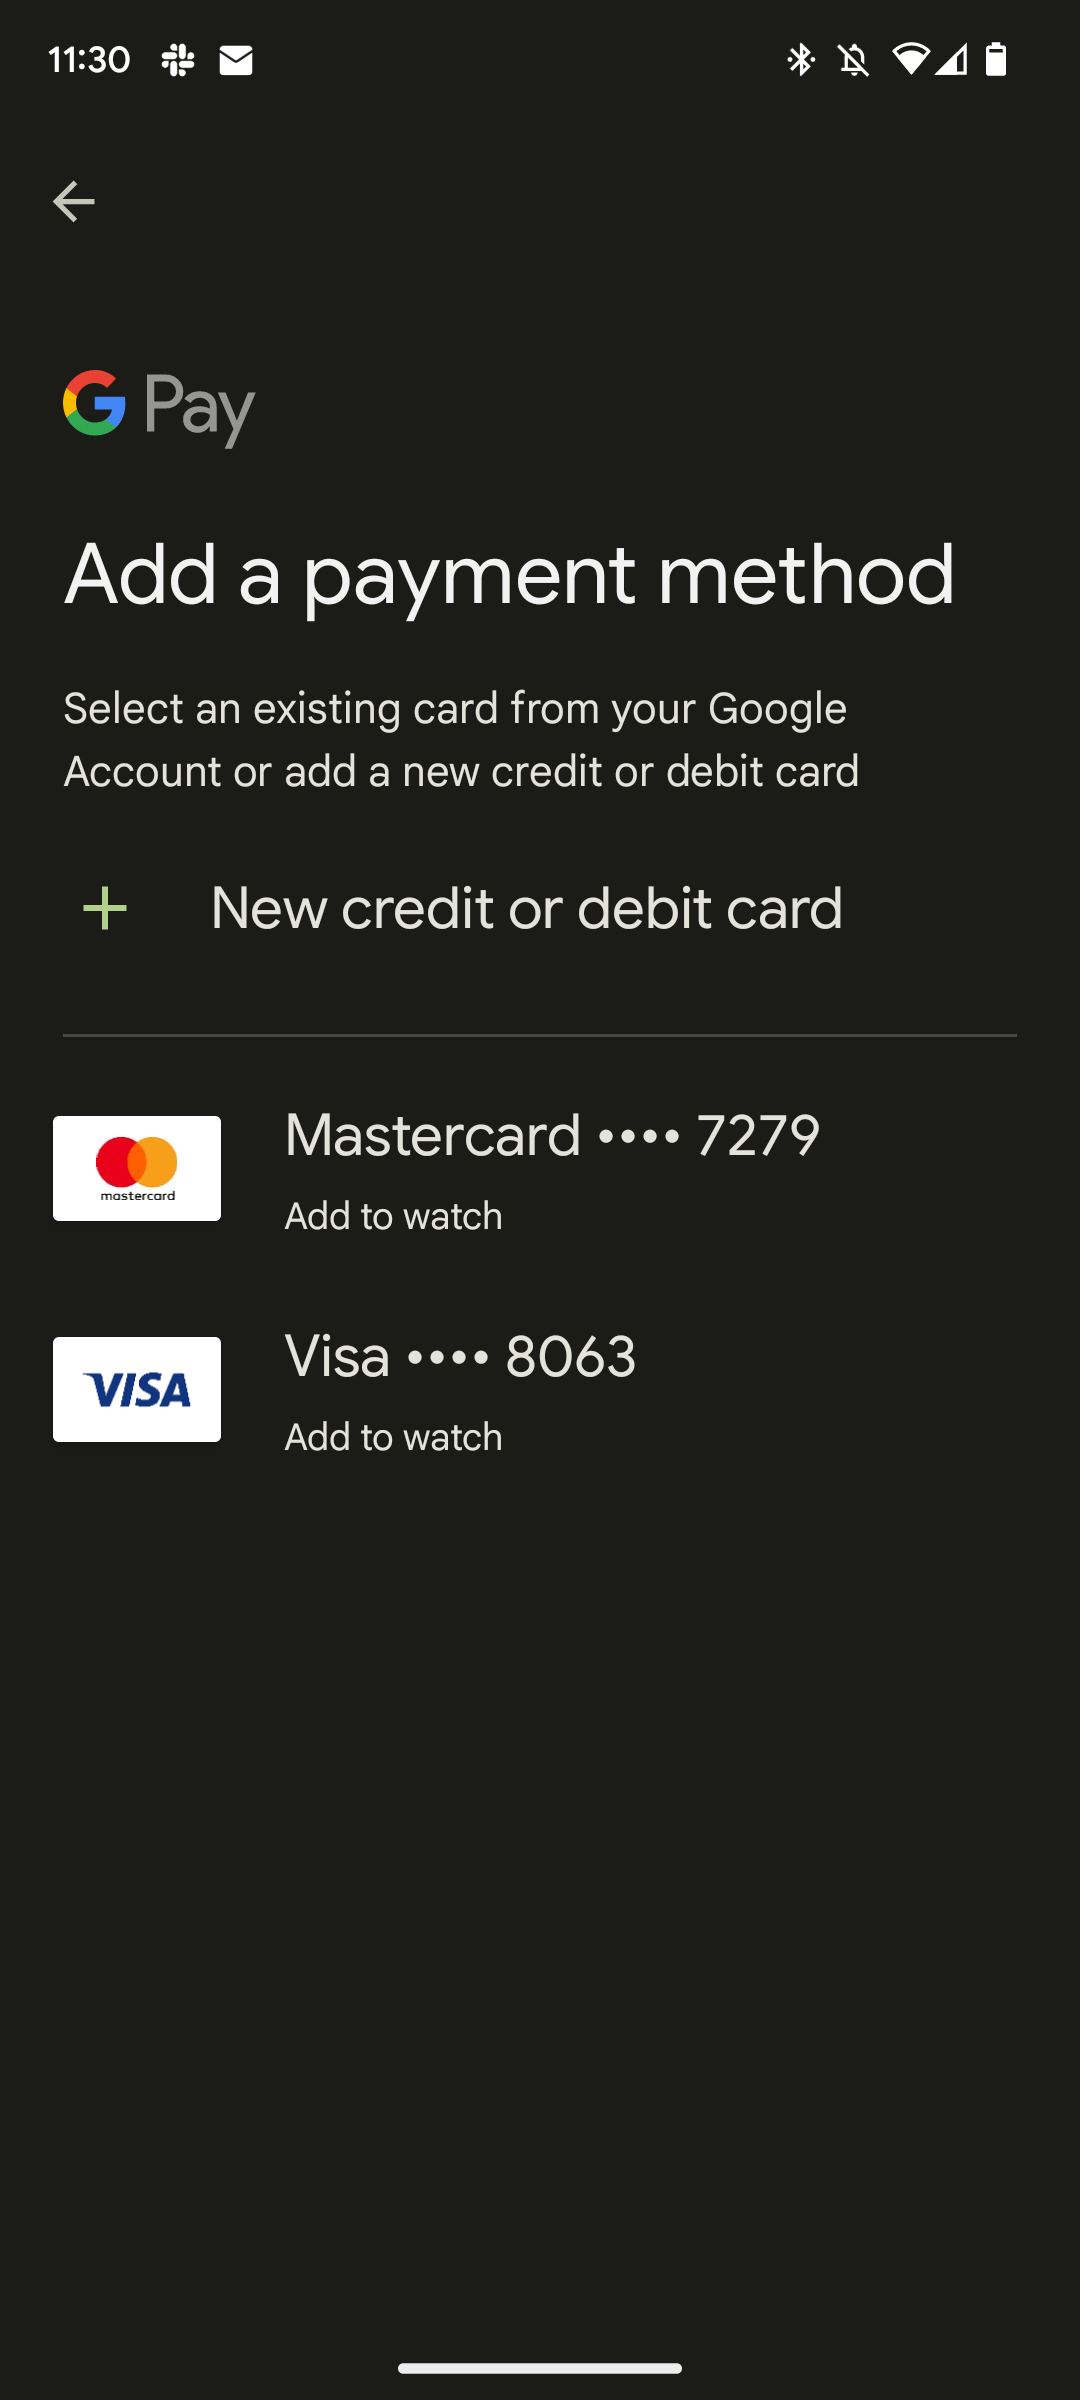 Add a payment method to Google Wallet